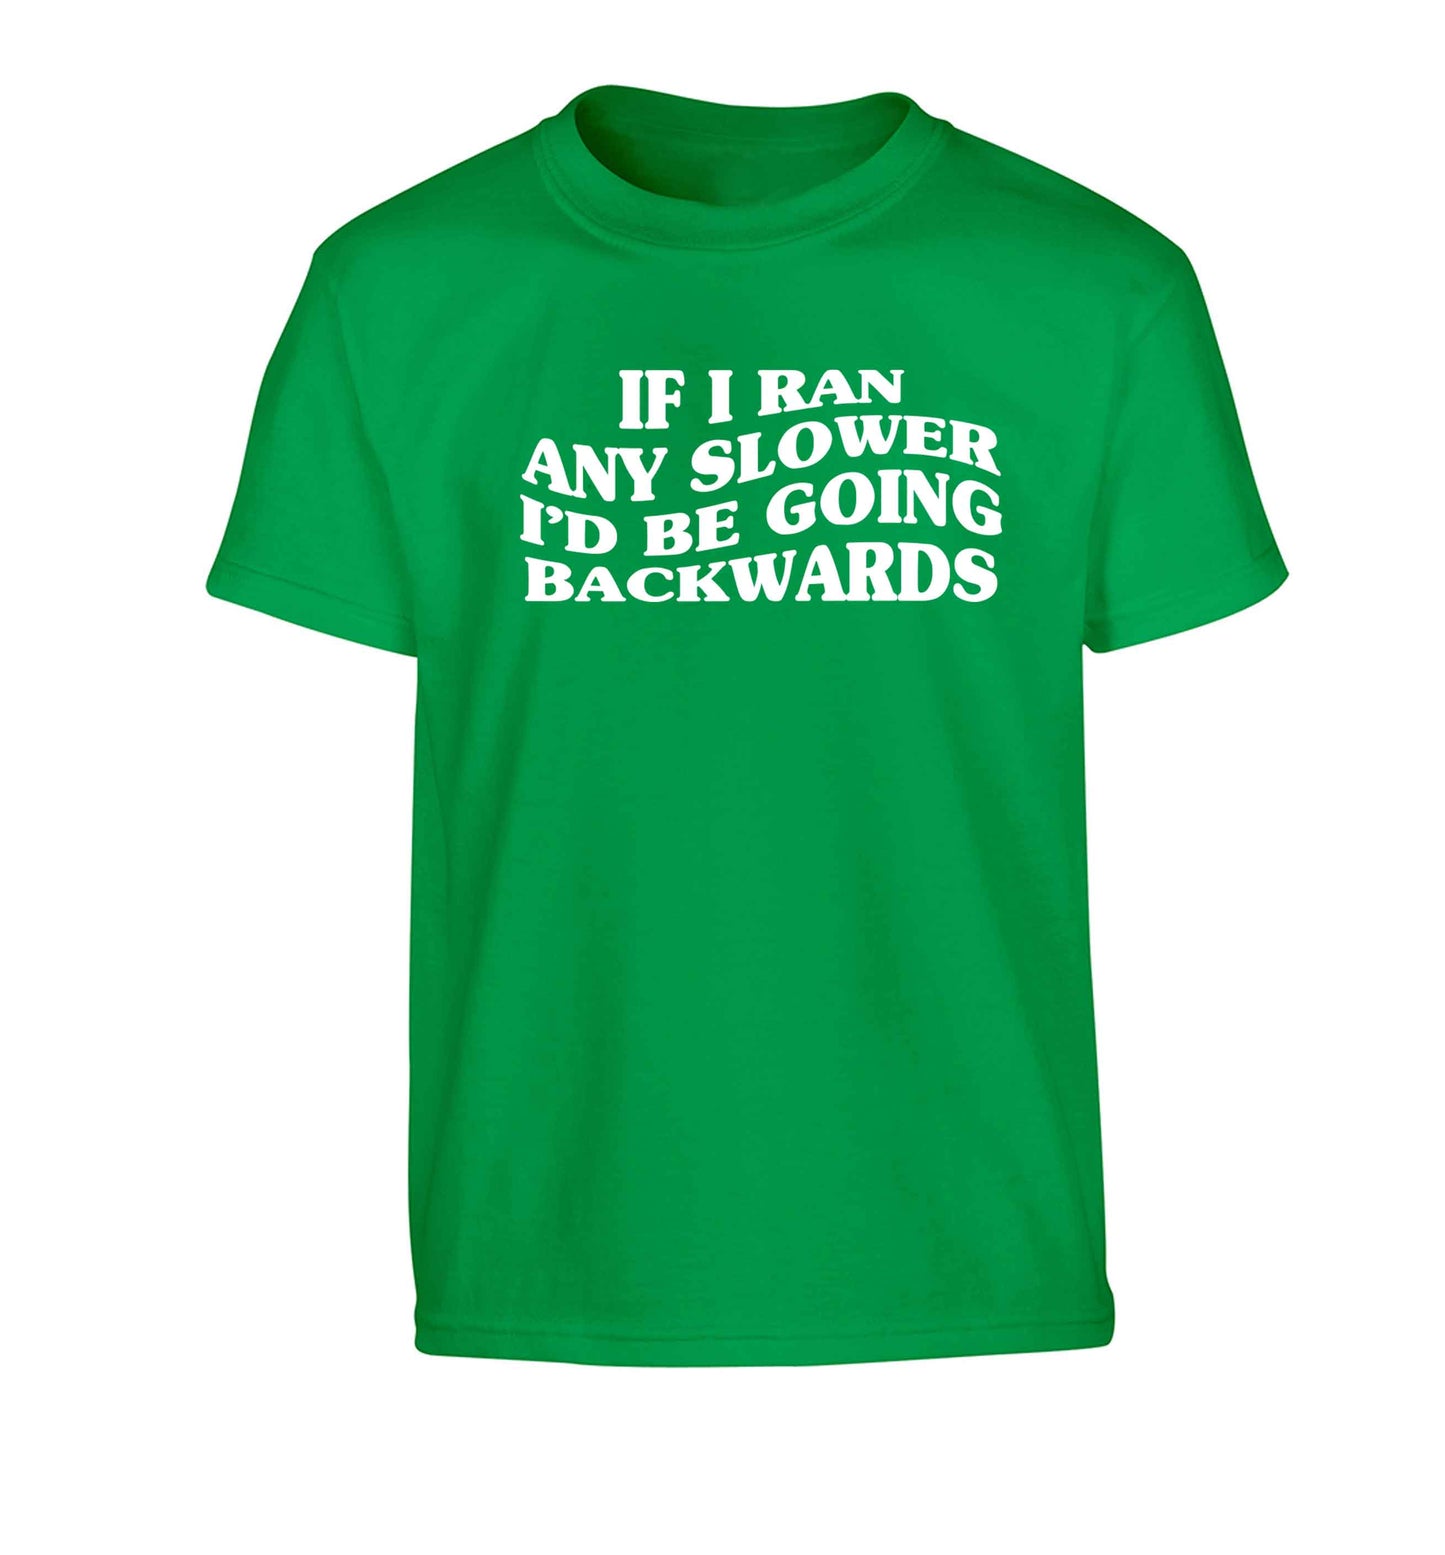 If I ran any slower I'd be going backwards Children's green Tshirt 12-13 Years